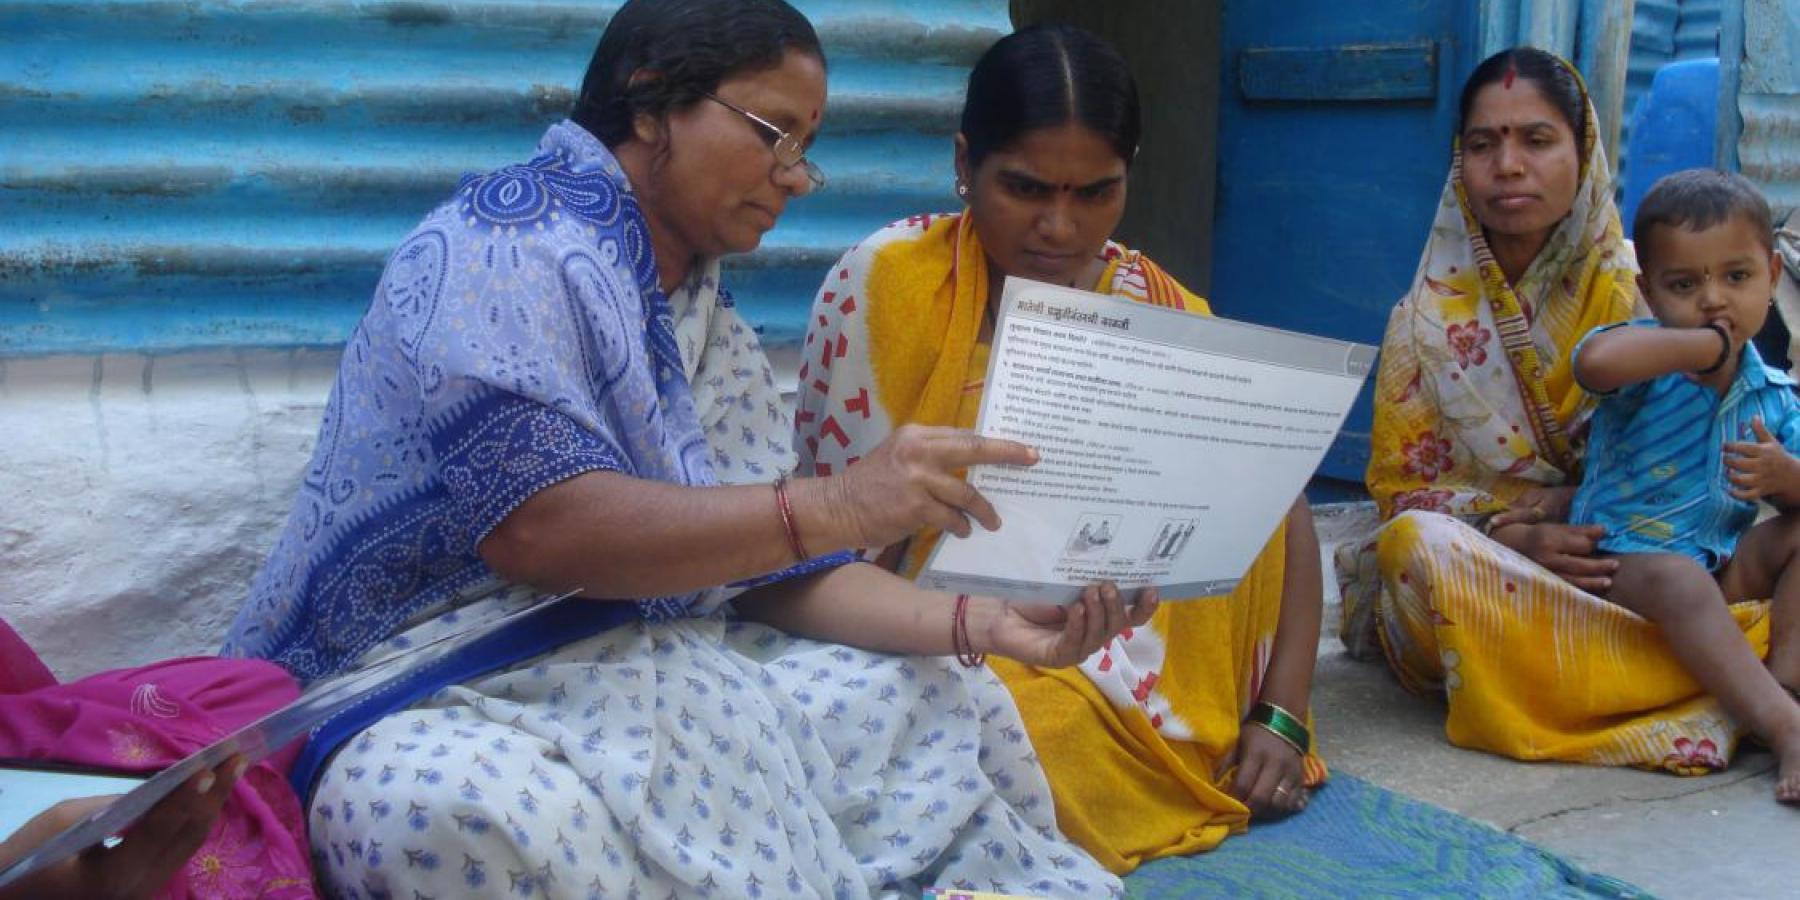 A self-help group (SHG) member provides a mother with information on infant and newborn care during a home visit in India.